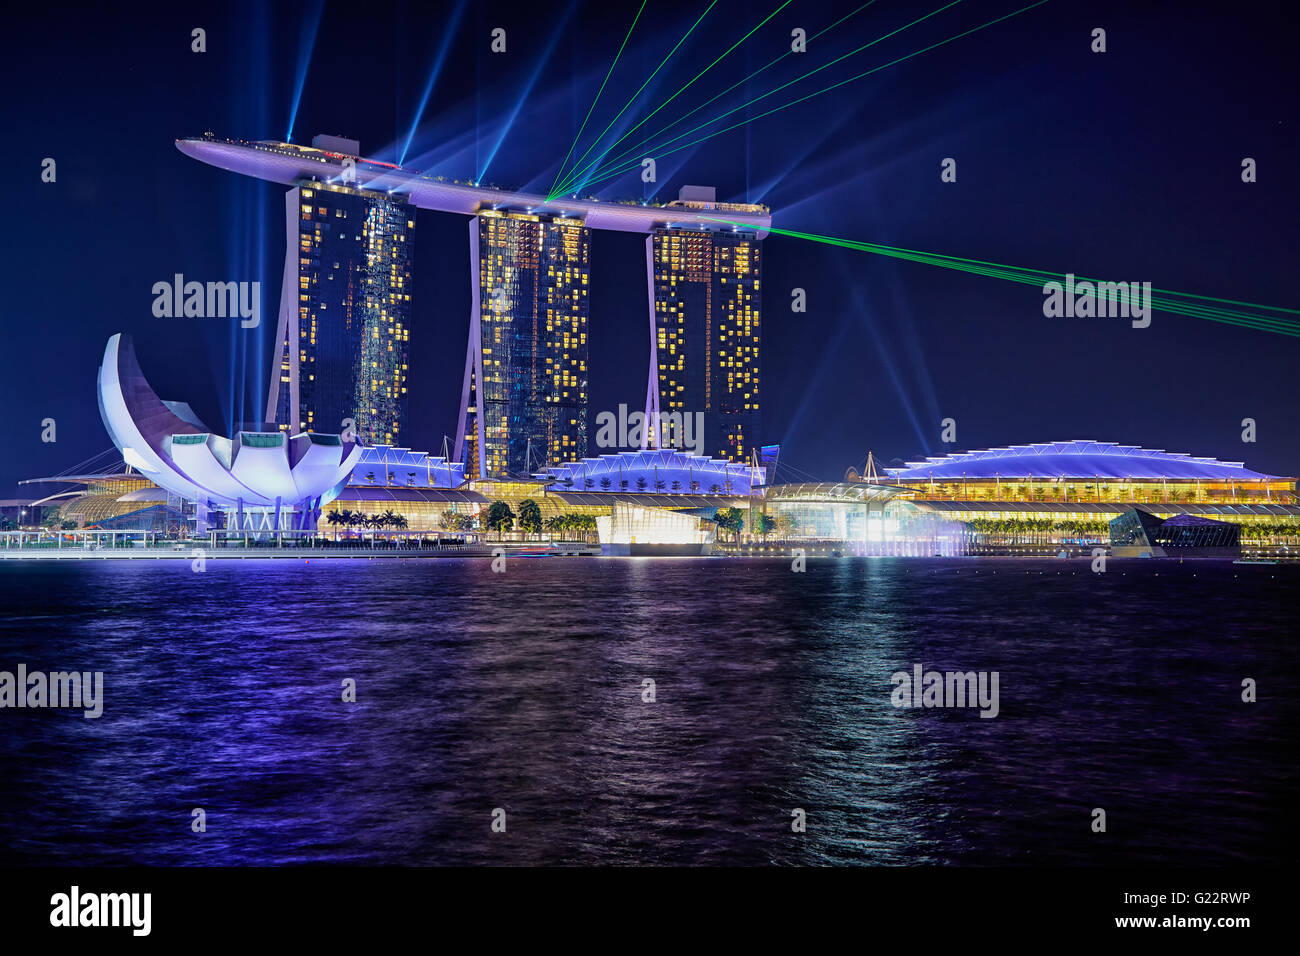 Evening light show featuring Marina Bay Sands in Singapore on July 12, 2012. Stock Photo